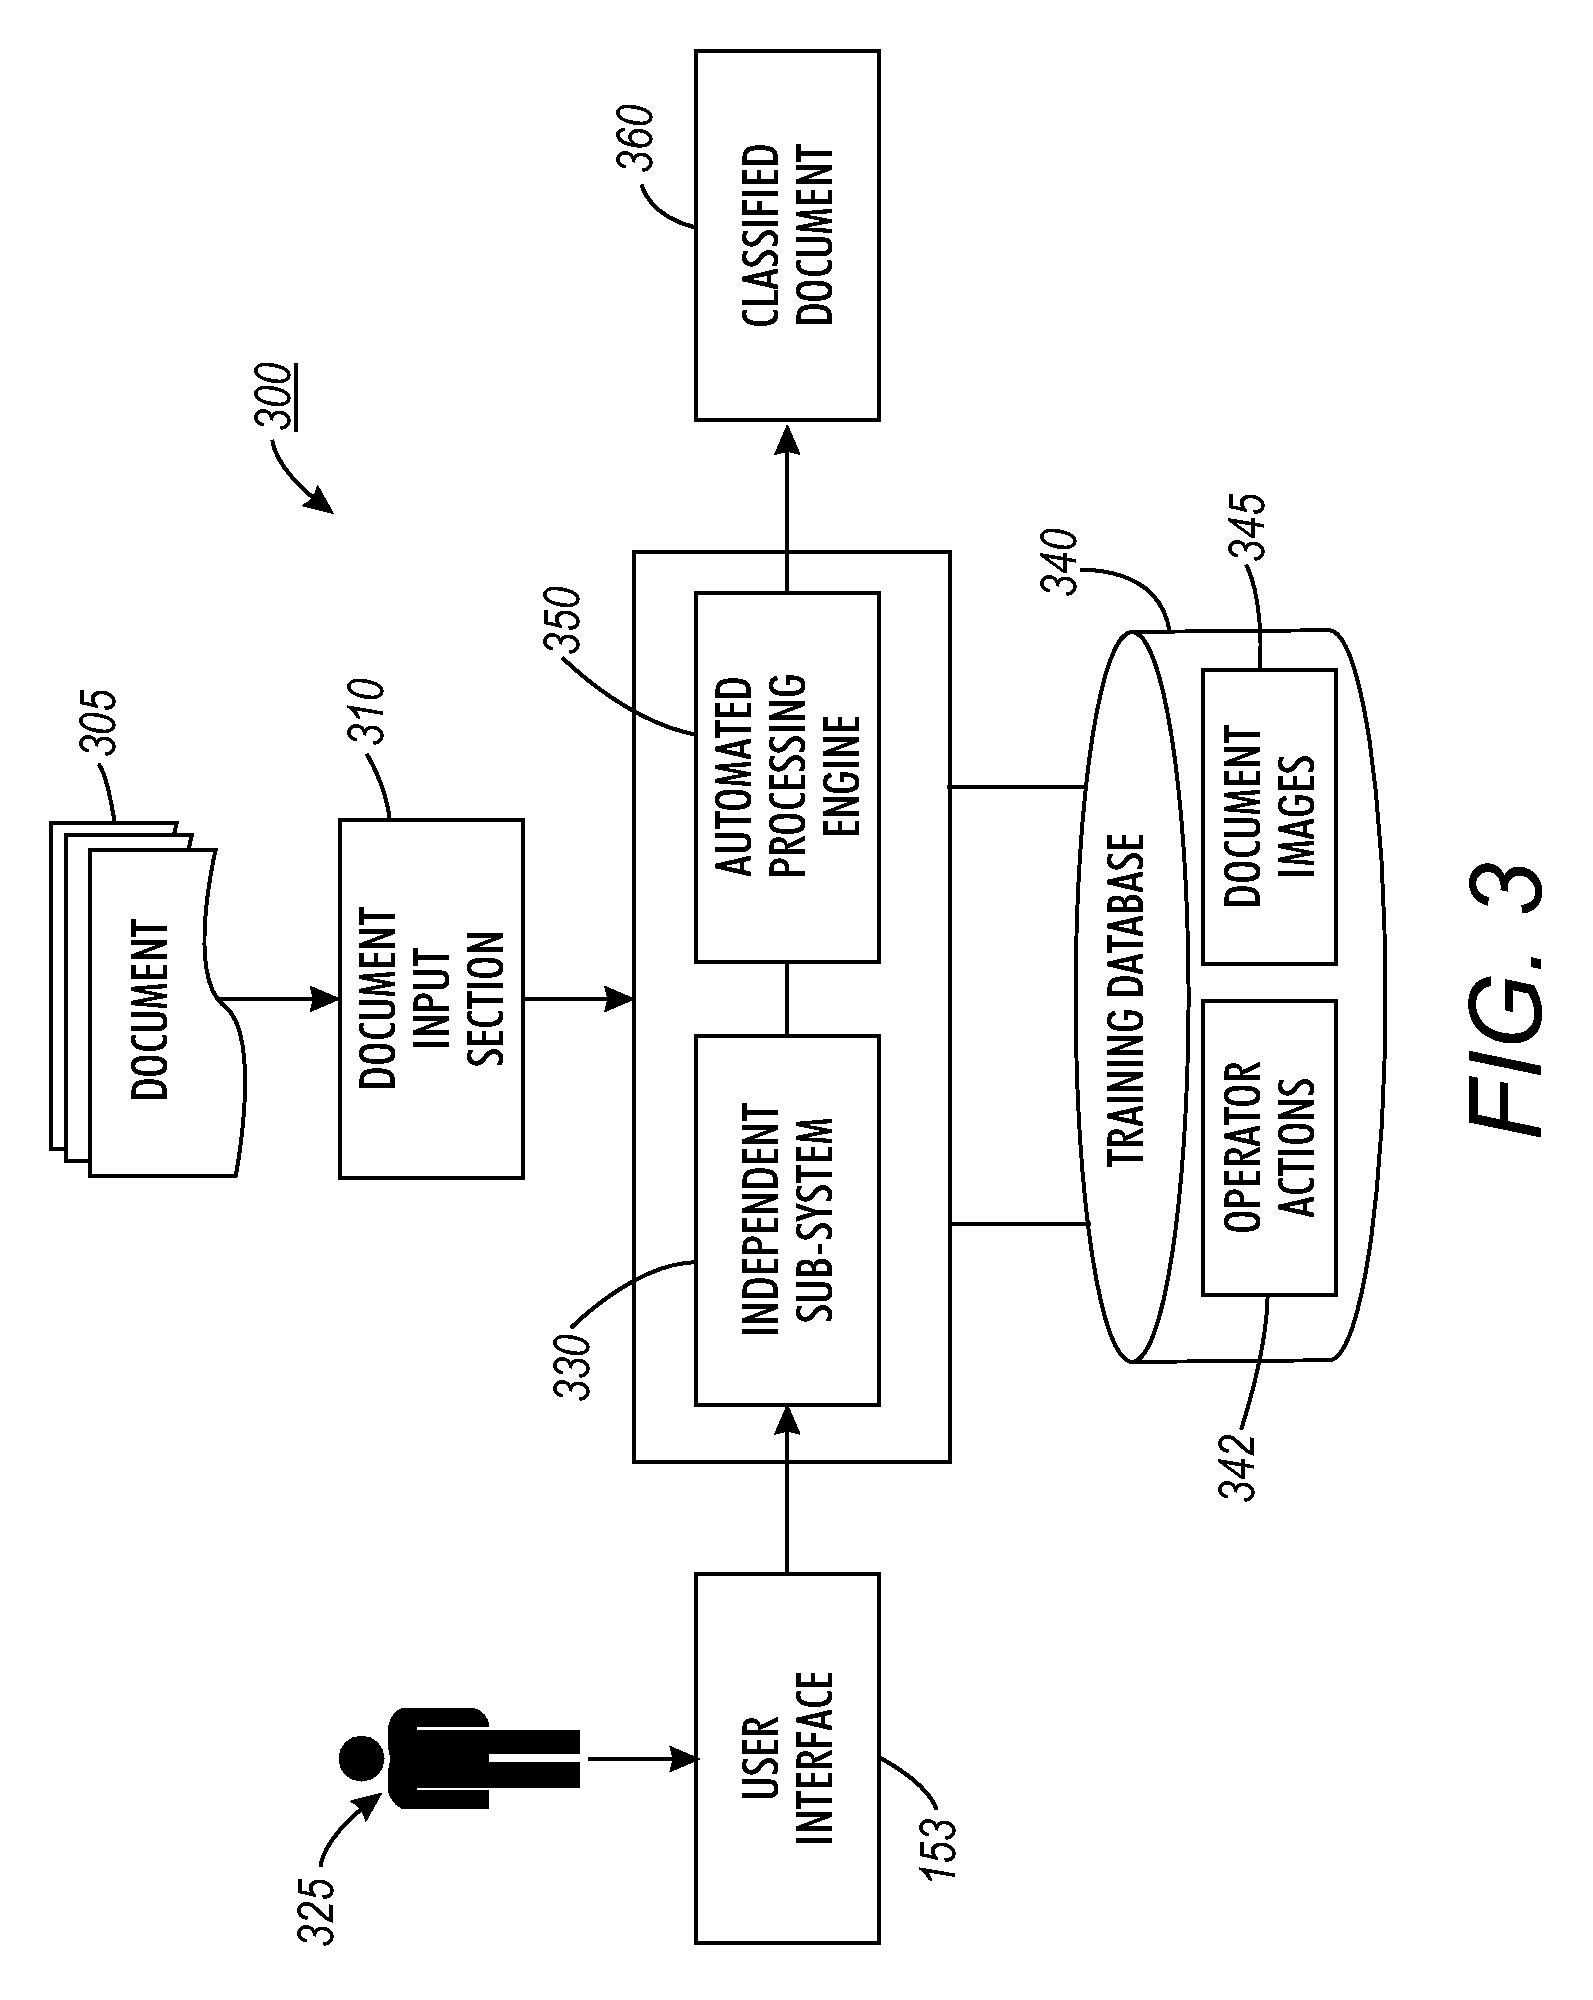 Method and system for training classification and extraction engine in an imaging solution